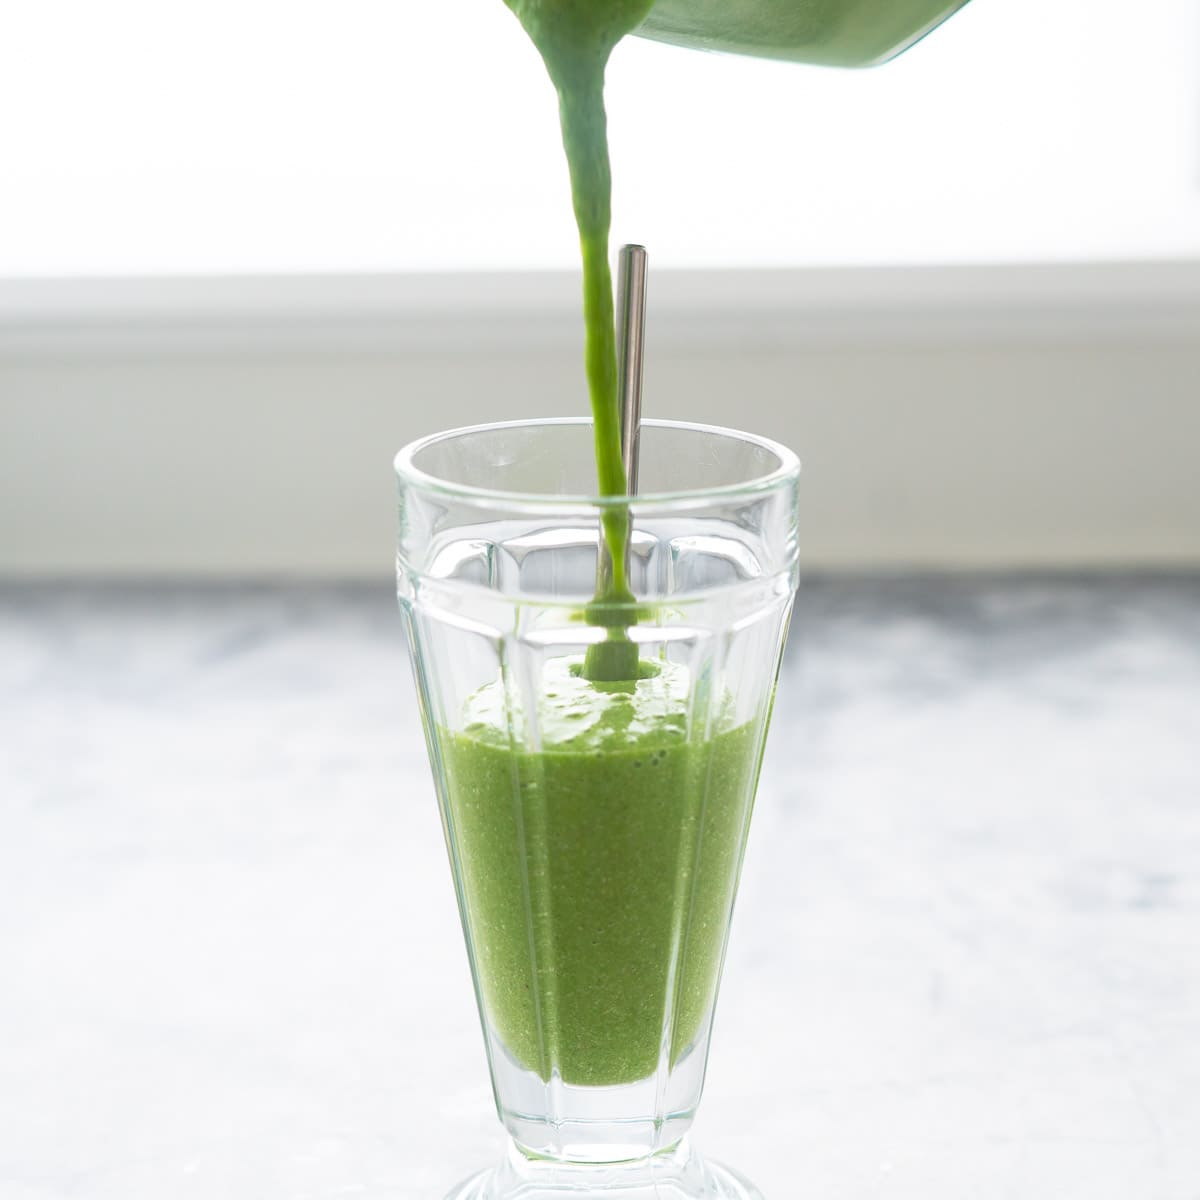 Green spinach smoothie being poured from the blender into a smoothy glass sitting on a bench